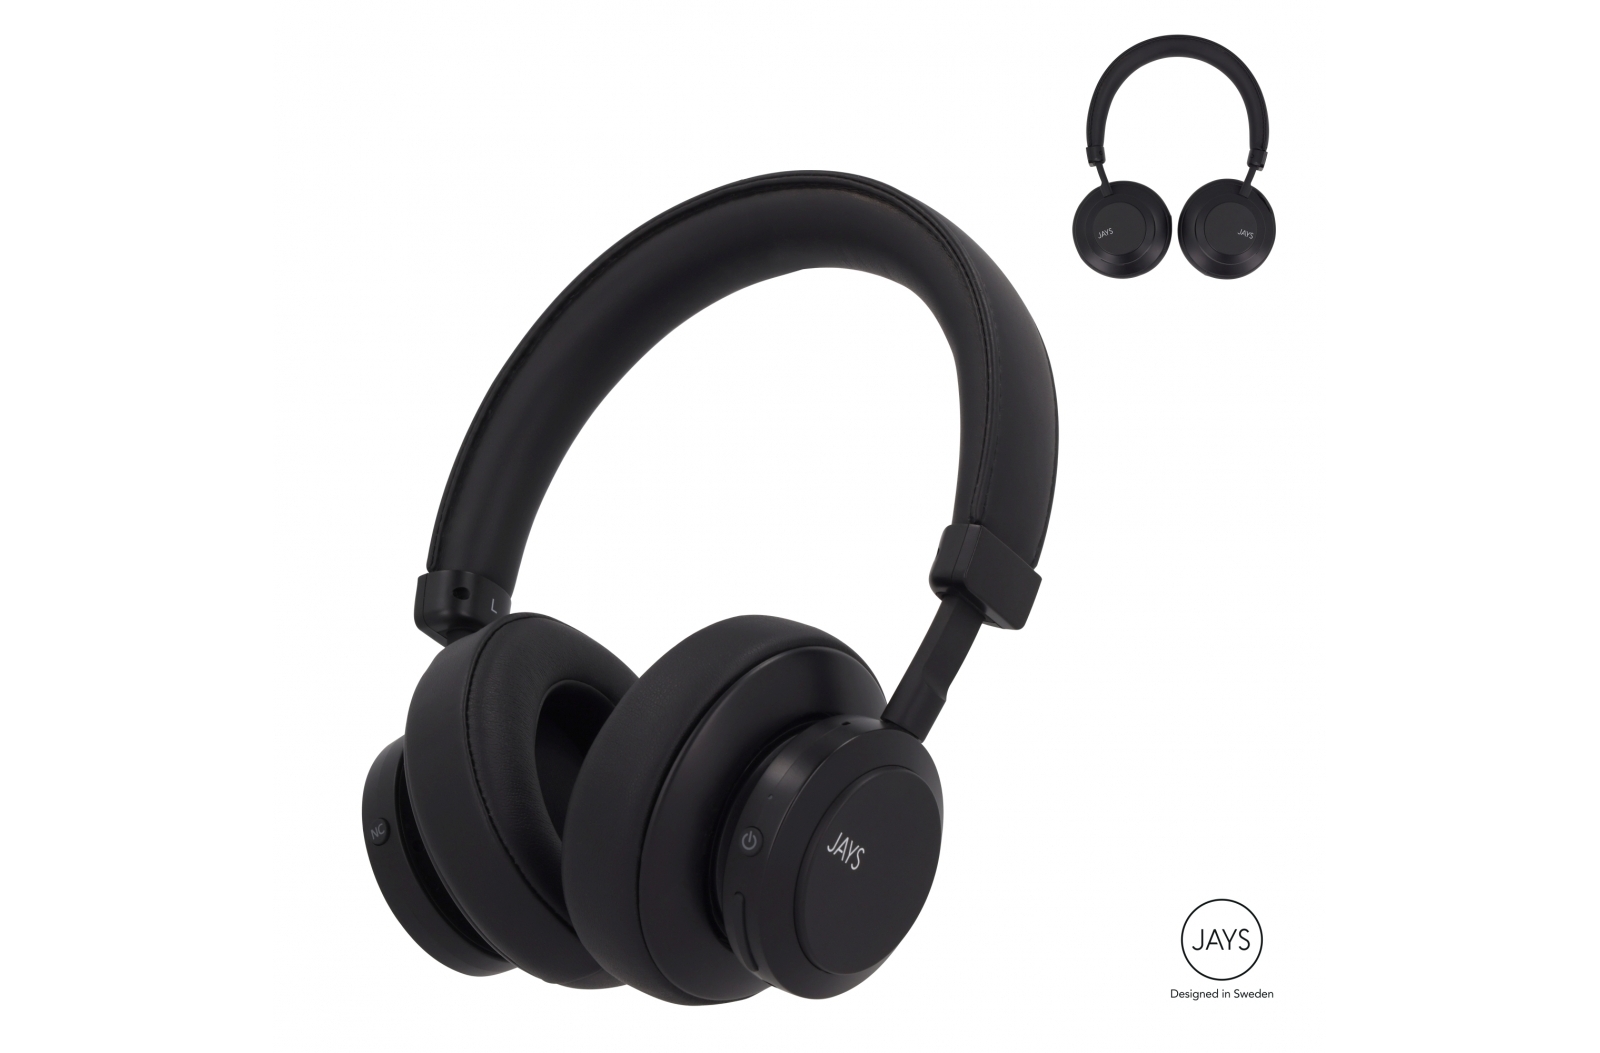 Holmfirth headphones that have a hybrid noise-cancelling feature - Hale